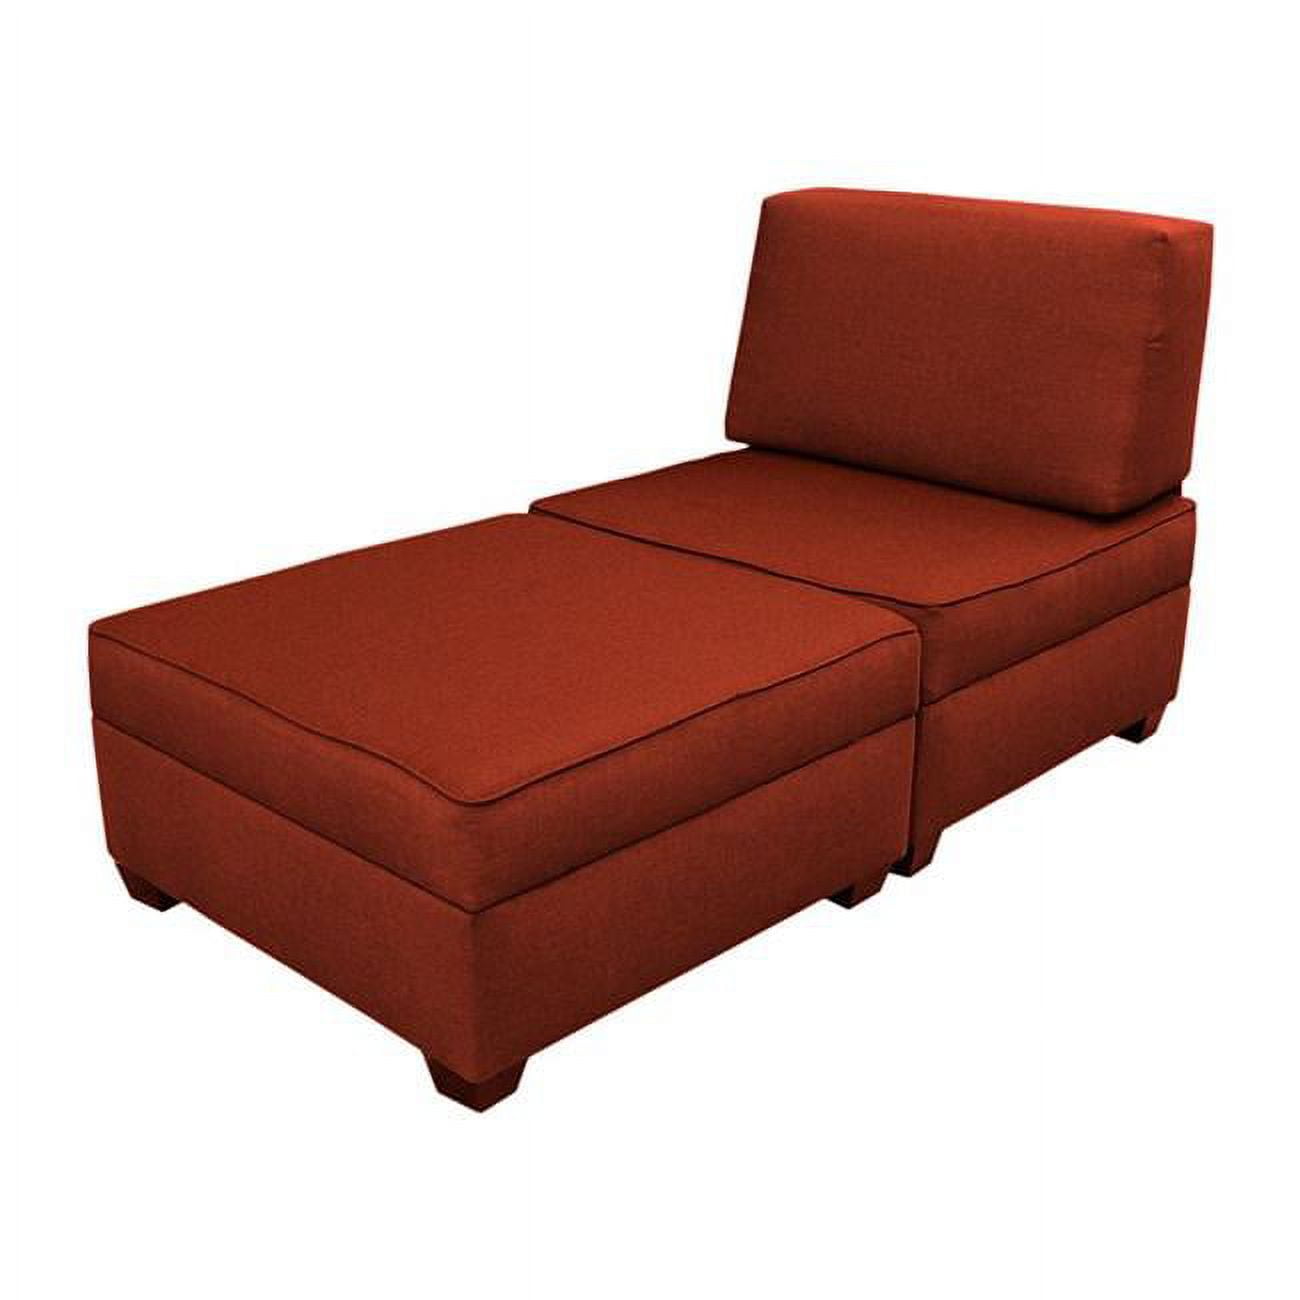 Mfcl-tc 36 In. Chaise Lounge Plus 1 Storage Ottomans - Brick